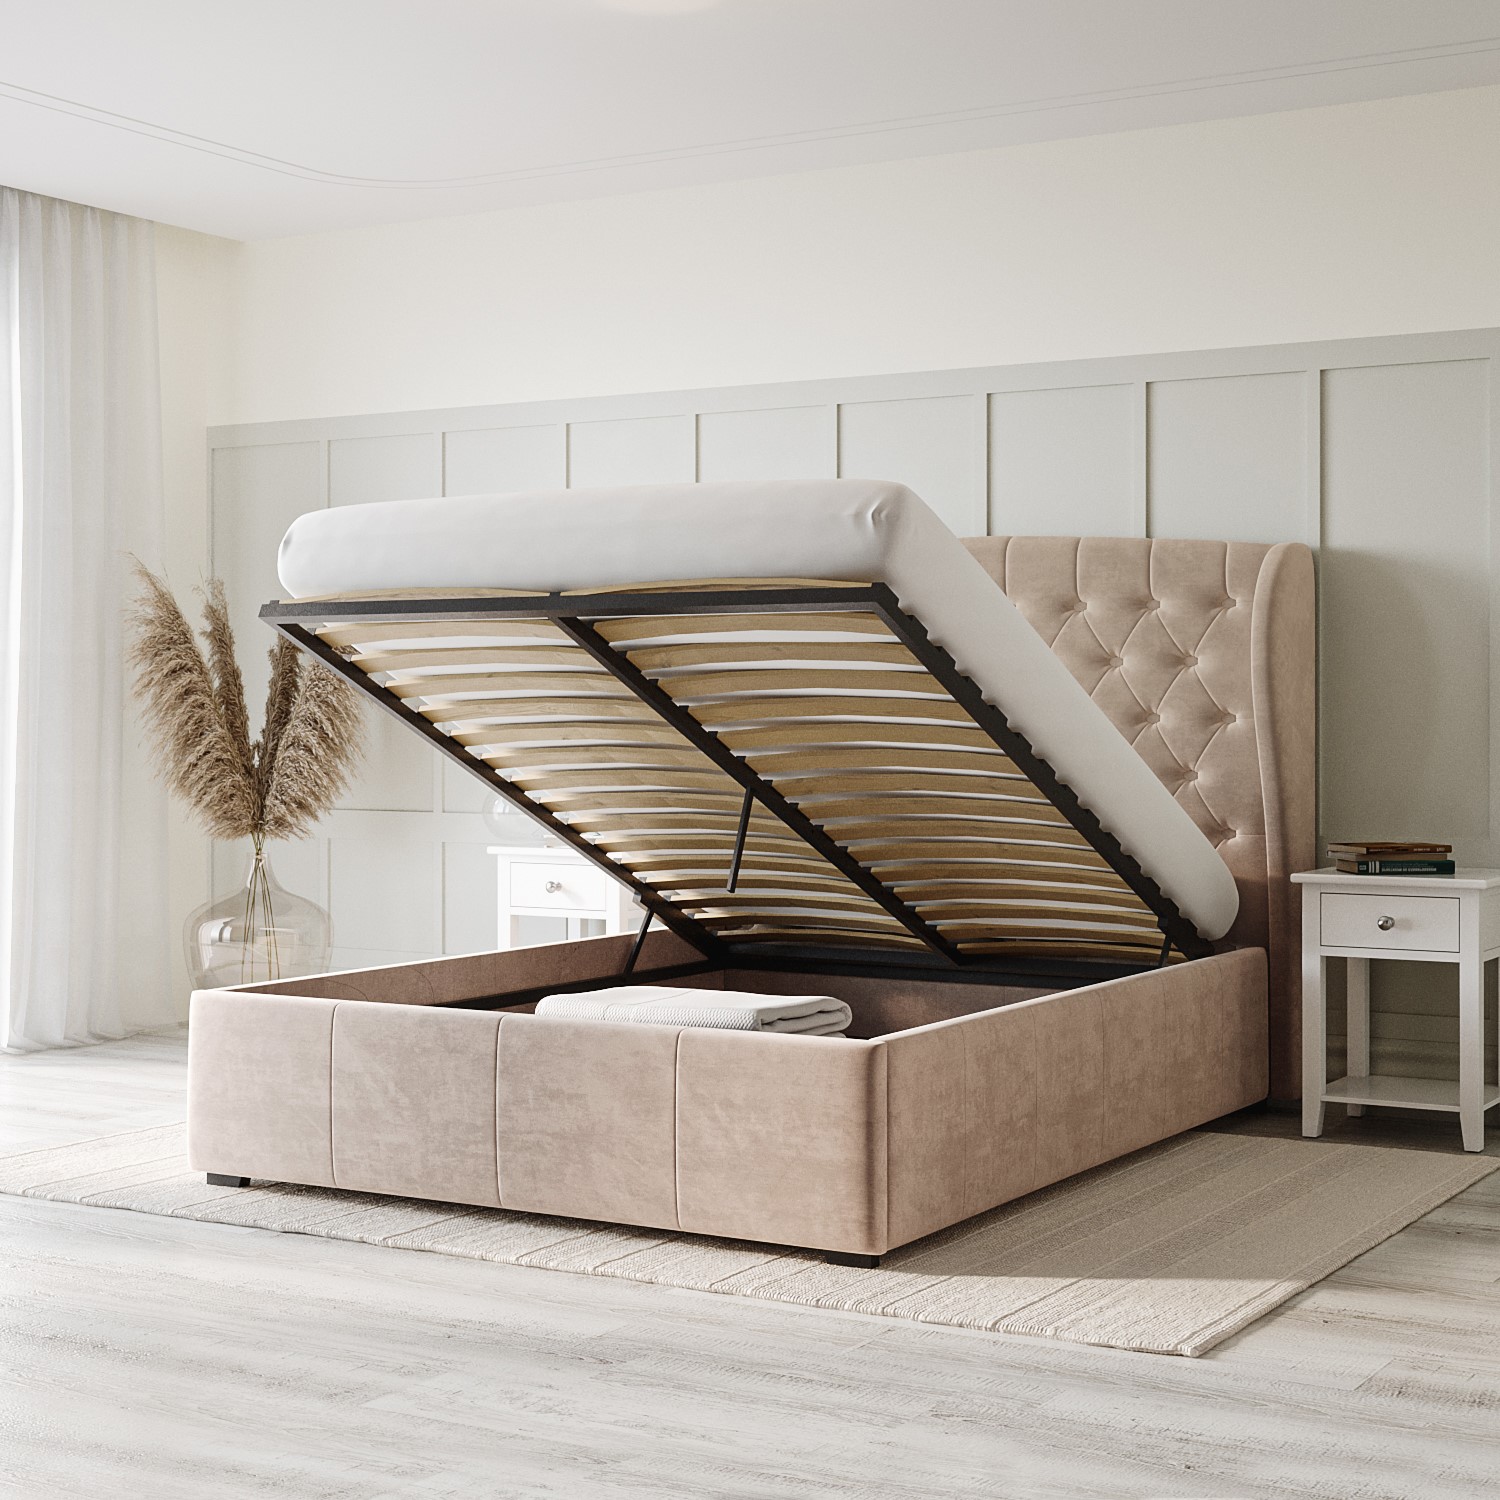 Read more about Beige velvet small double ottoman bed with winged headboard safina